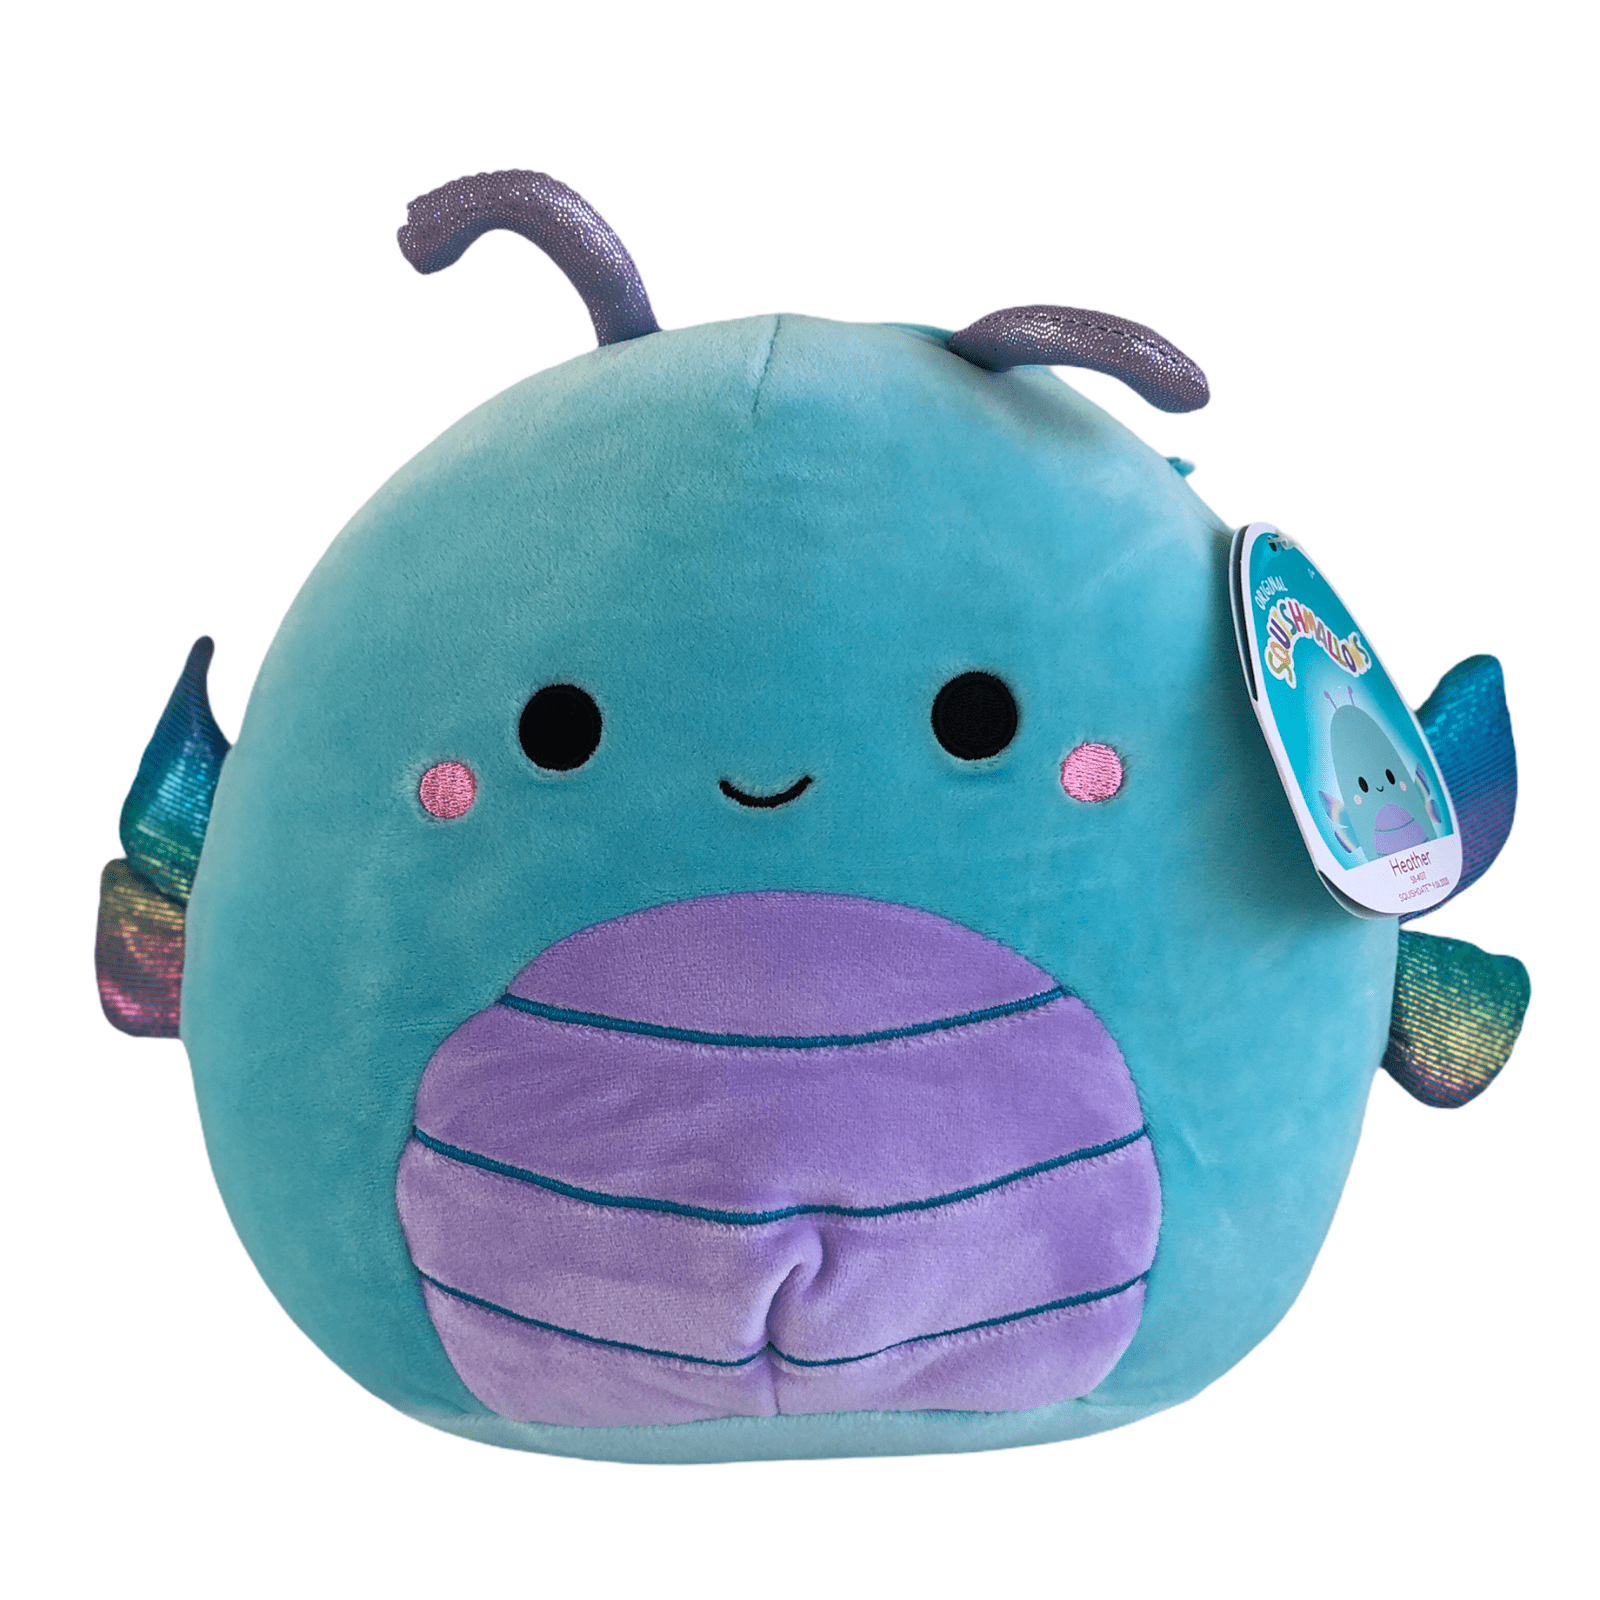 Squishmallows HEATHER the Dragonfly 8" Plush New with Tags 